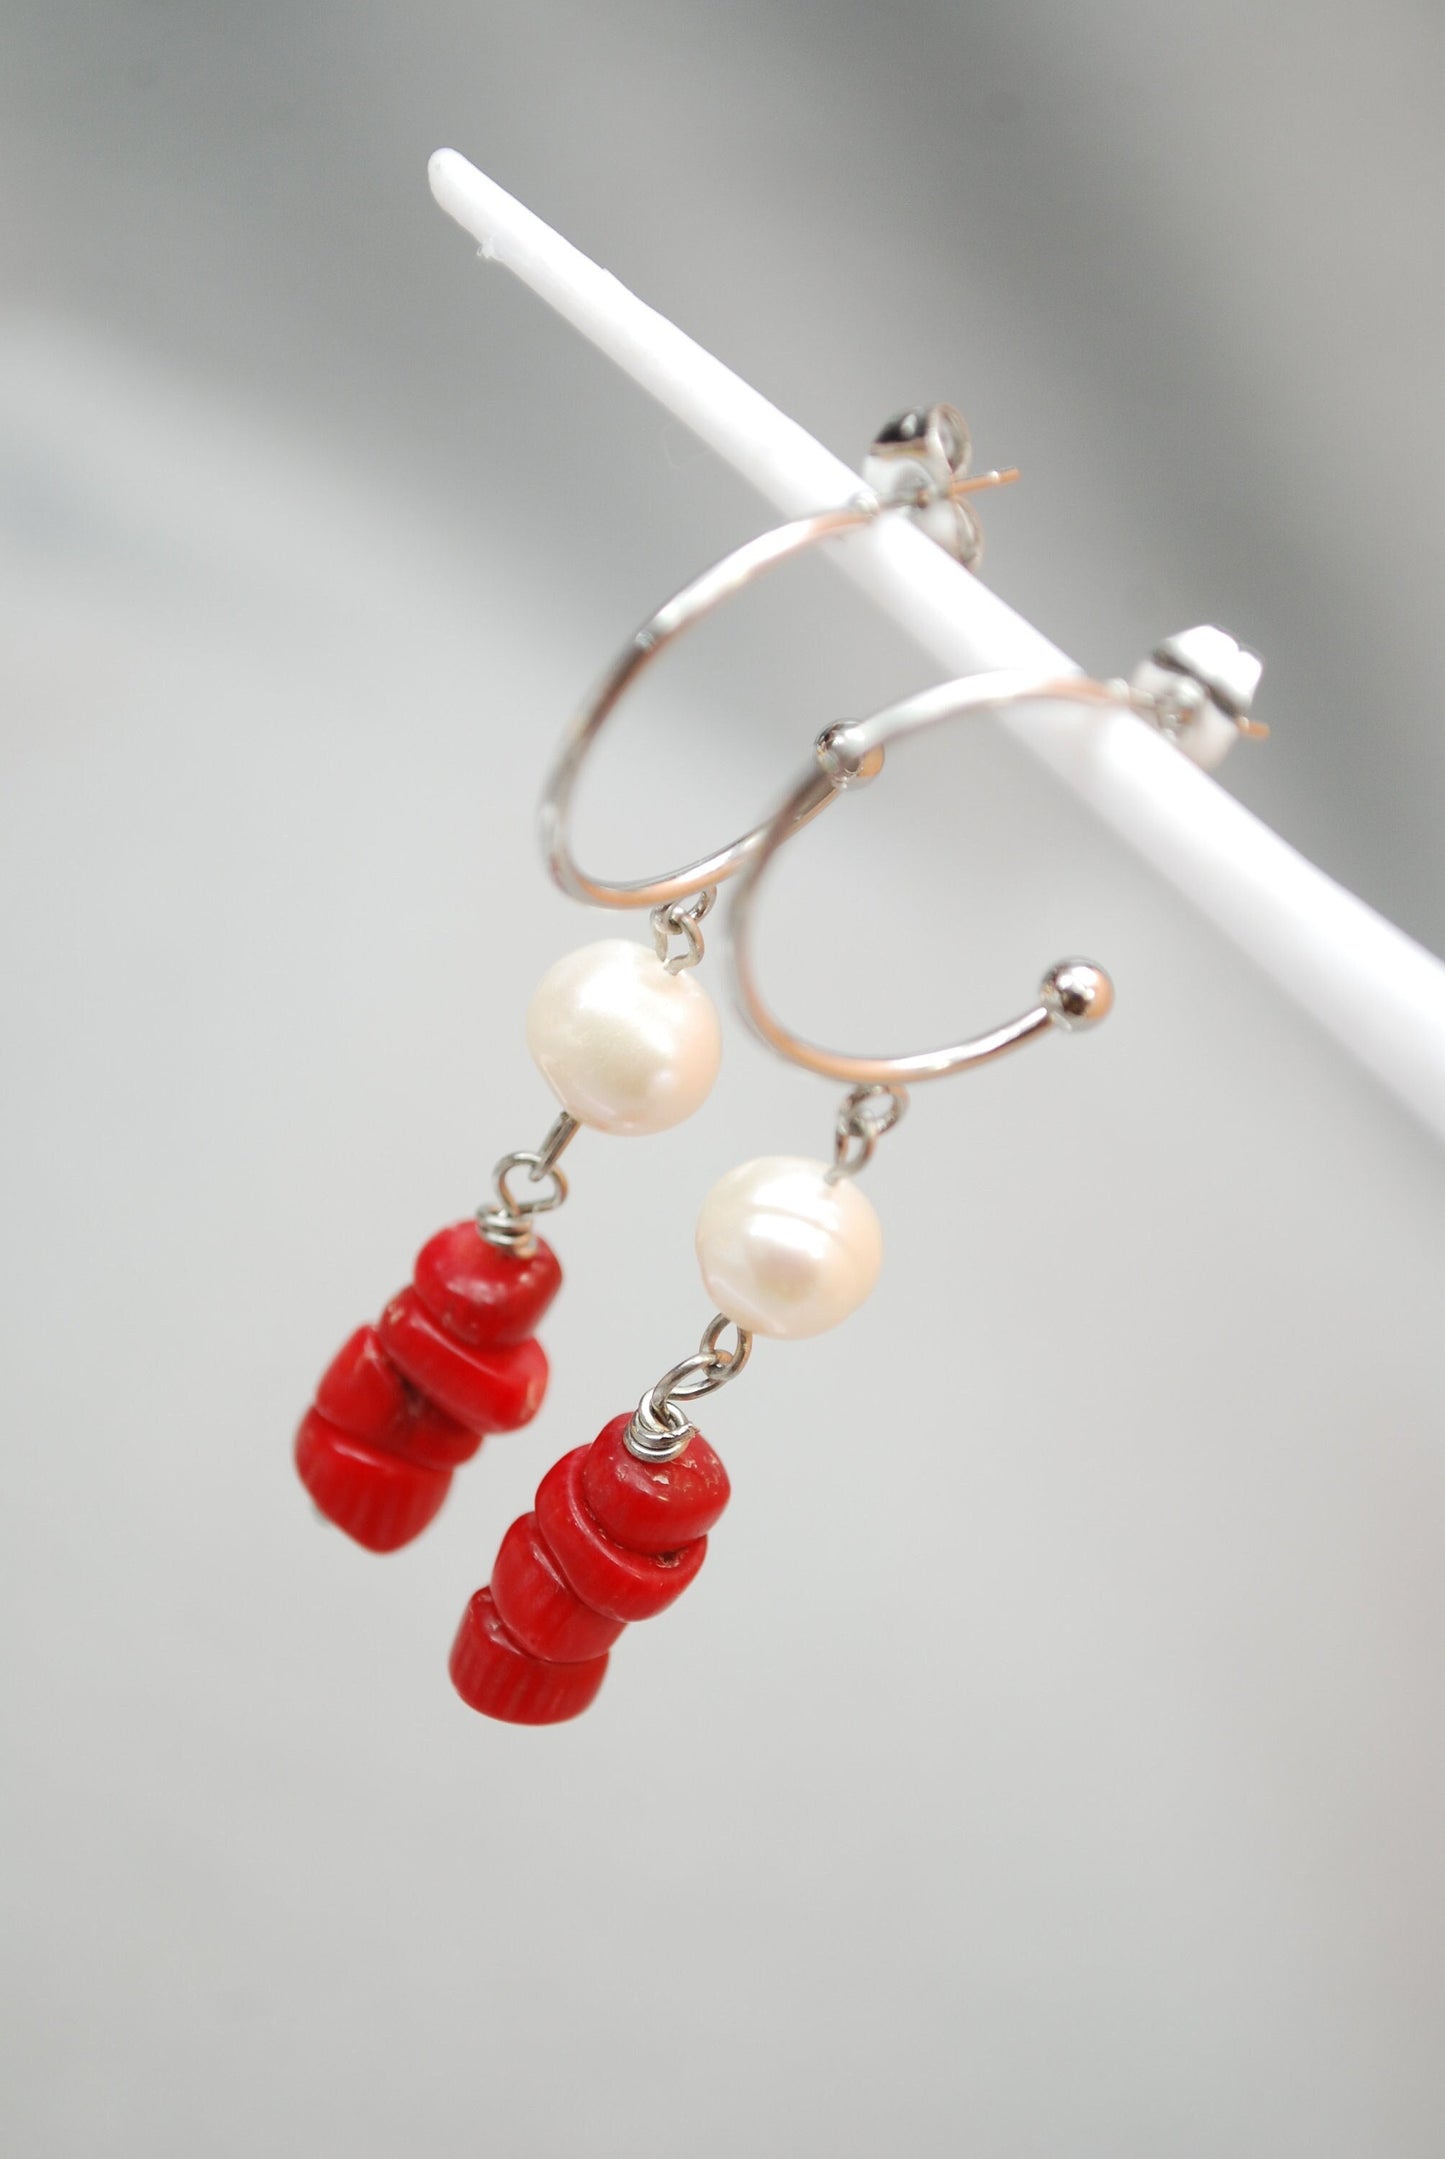 Stainless Steel Earrings with River Pearl Bead and Red Coral Stone Accents - Estibela design -5.4cm 2.2"